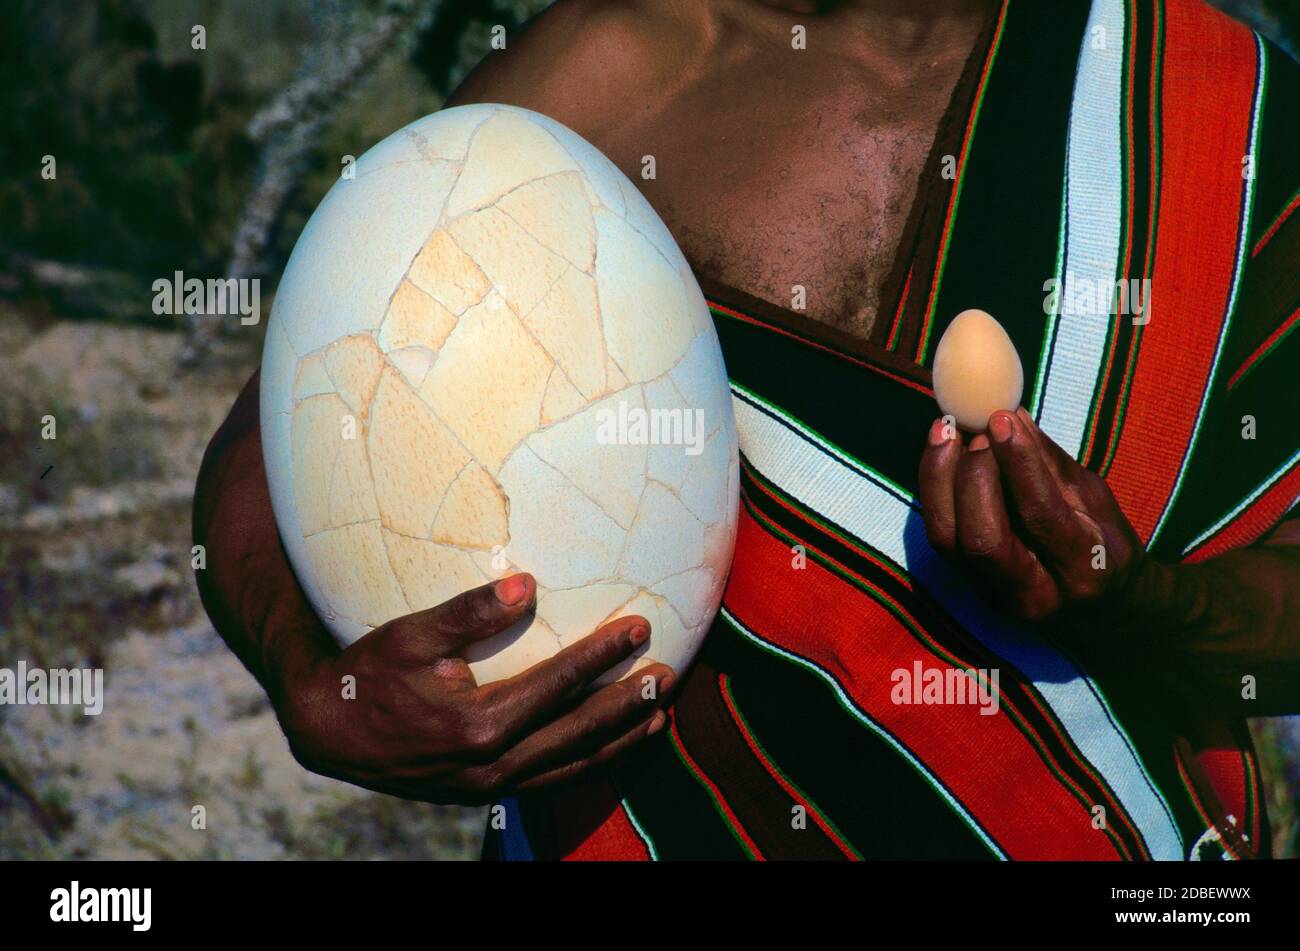 Antandroy Man Holding a Giant Egg of the Extinct Elephant Bird, Aepyornis species, and Standard Hen's Egg Madagascar. The world's largest bird's egg compared with a regular hen's egg for size comparison. Stock Photo